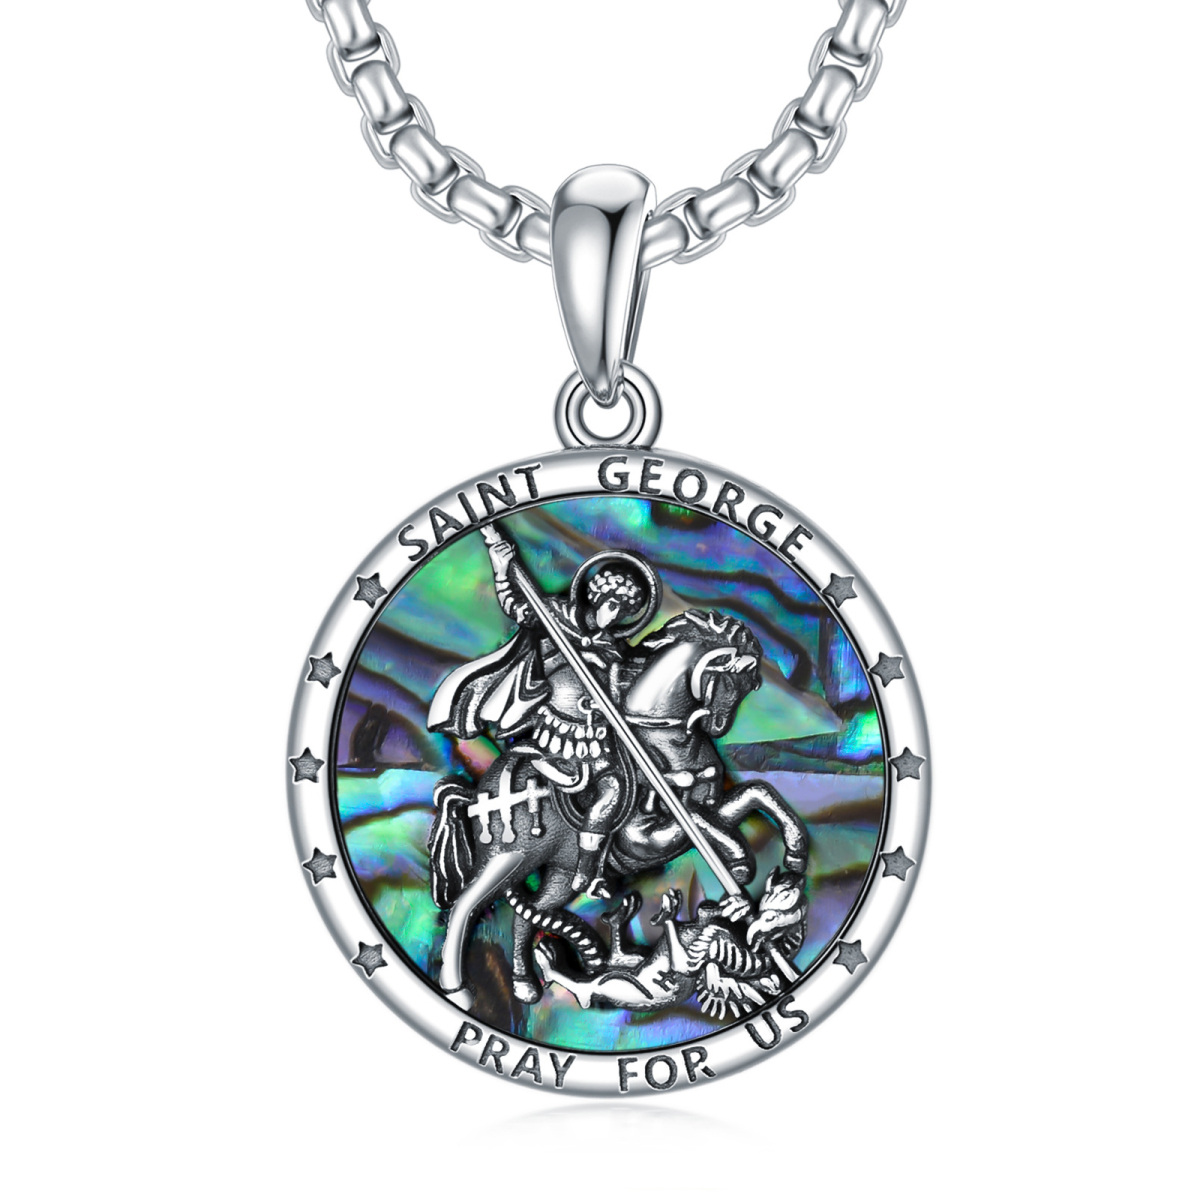 Sterling Silver Circular Shaped Abalone Shellfish Saint George Pendant Necklace with Engraved Word for Men-1